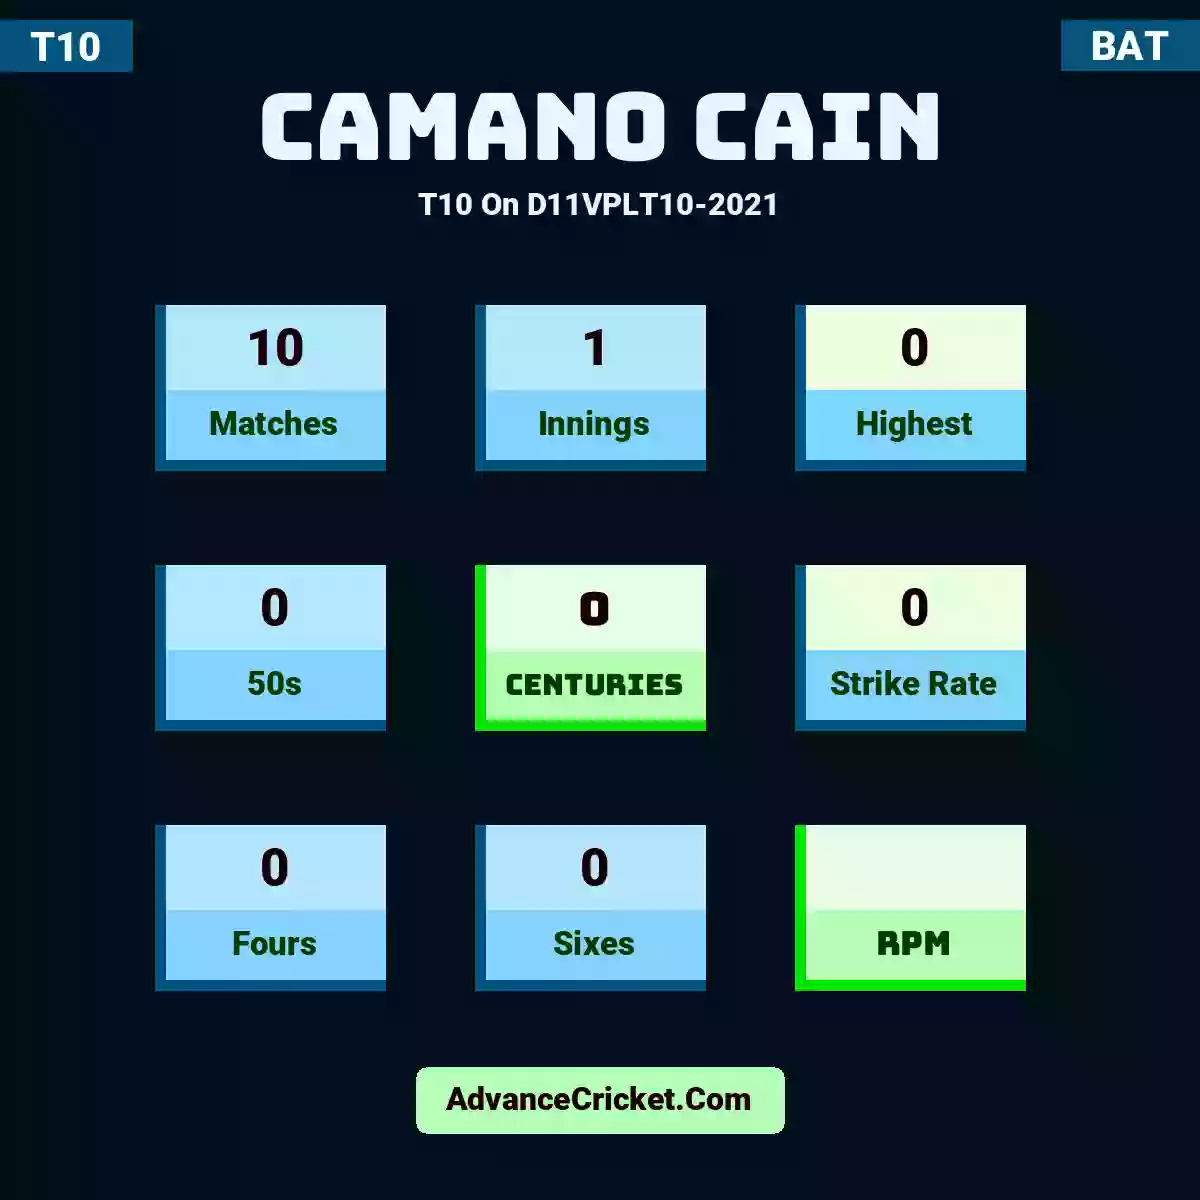 Camano Cain T10  On D11VPLT10-2021, Camano Cain played 10 matches, scored 0 runs as highest, 0 half-centuries, and 0 centuries, with a strike rate of 0. C.Cain hit 0 fours and 0 sixes.